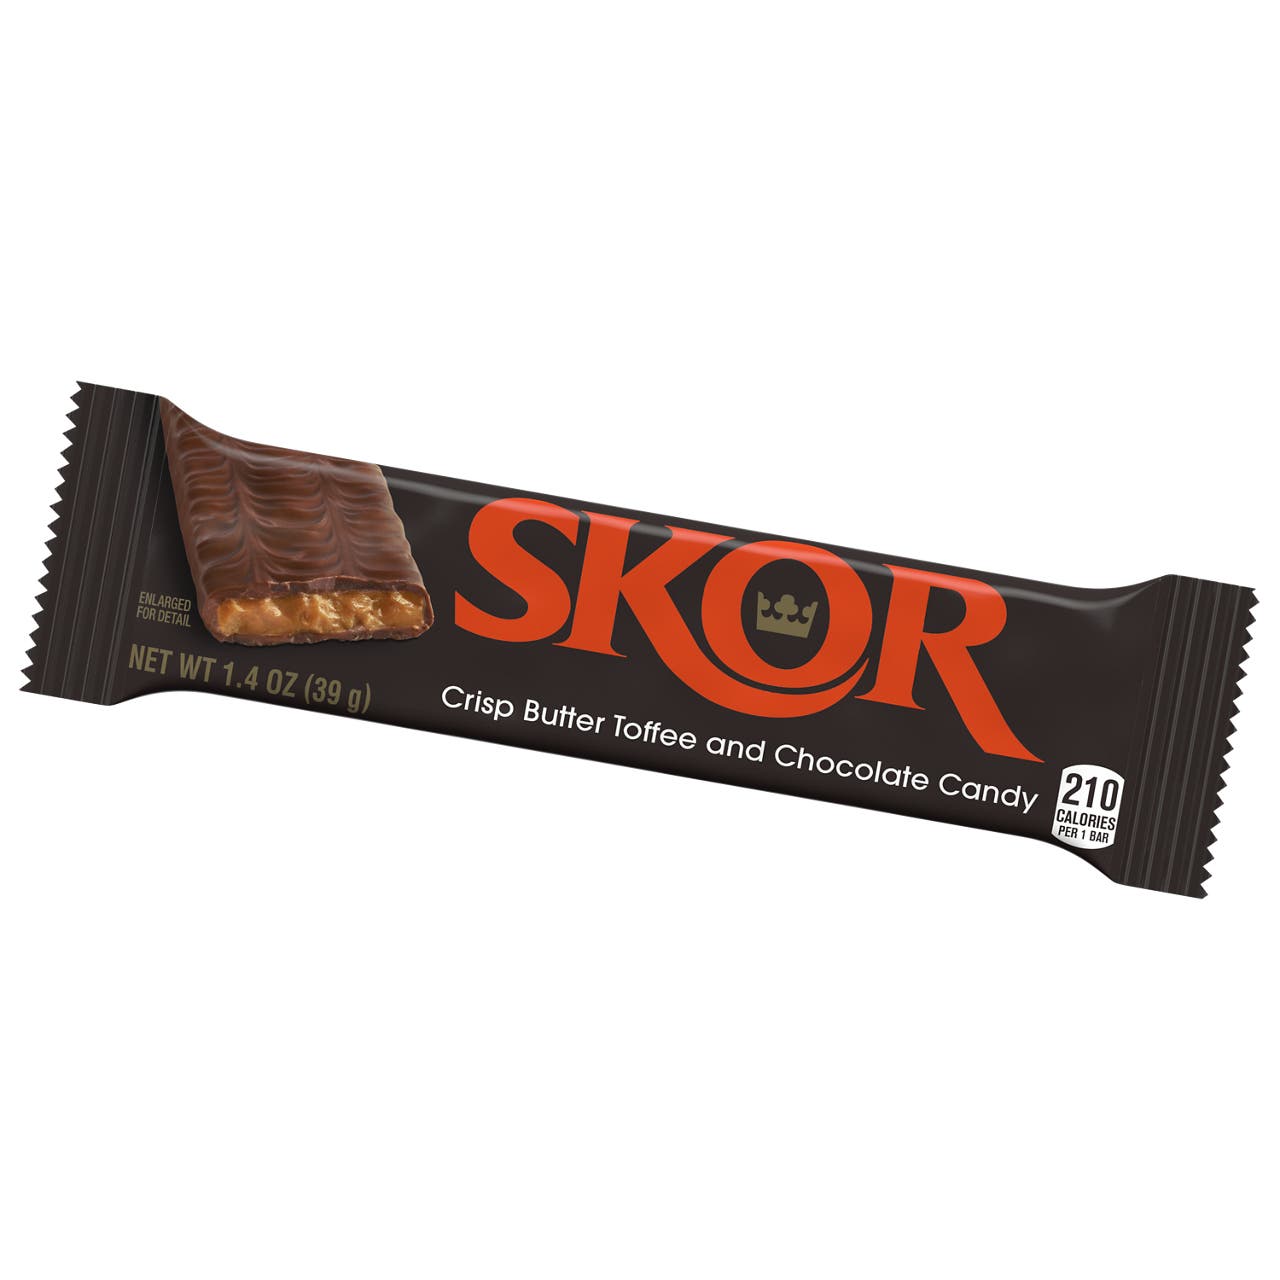 skor milk chocolate with crisp butter toffee candy bar